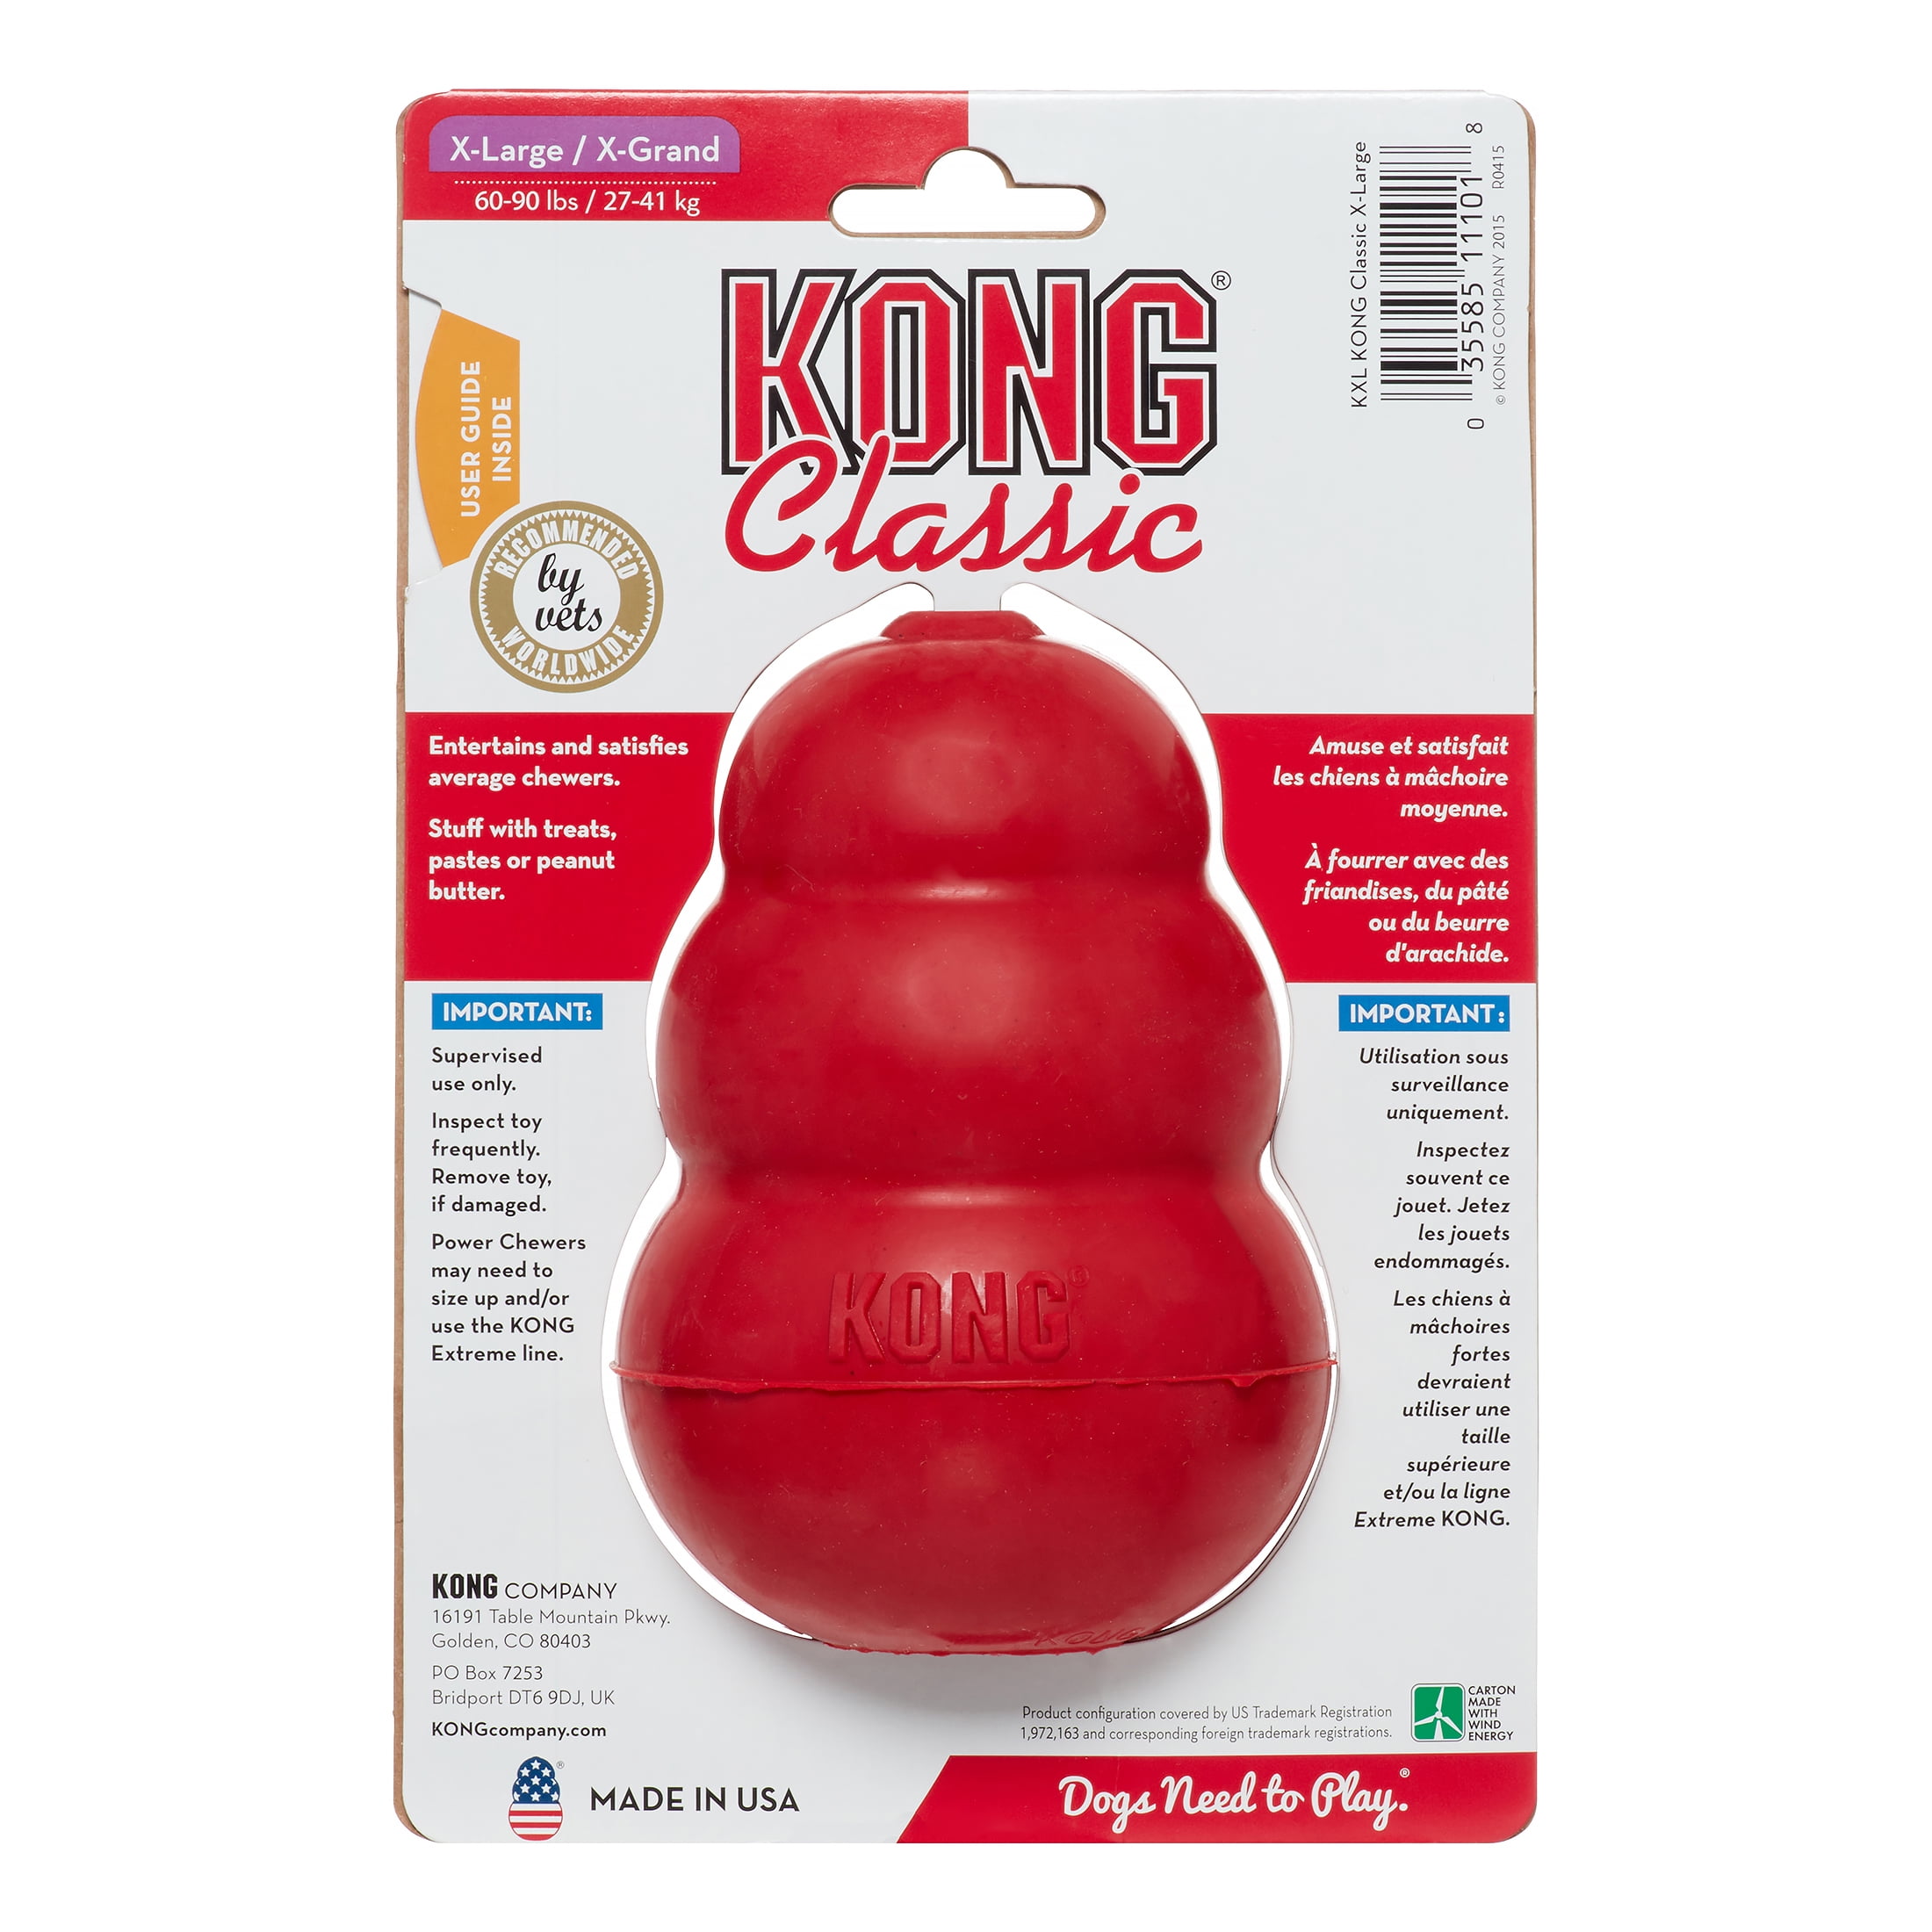 ULTIMATE Kong Bundle - Kong Dog Toy Classic Bundled with Kong Easy Treat  (Peanut Butter Flavor)